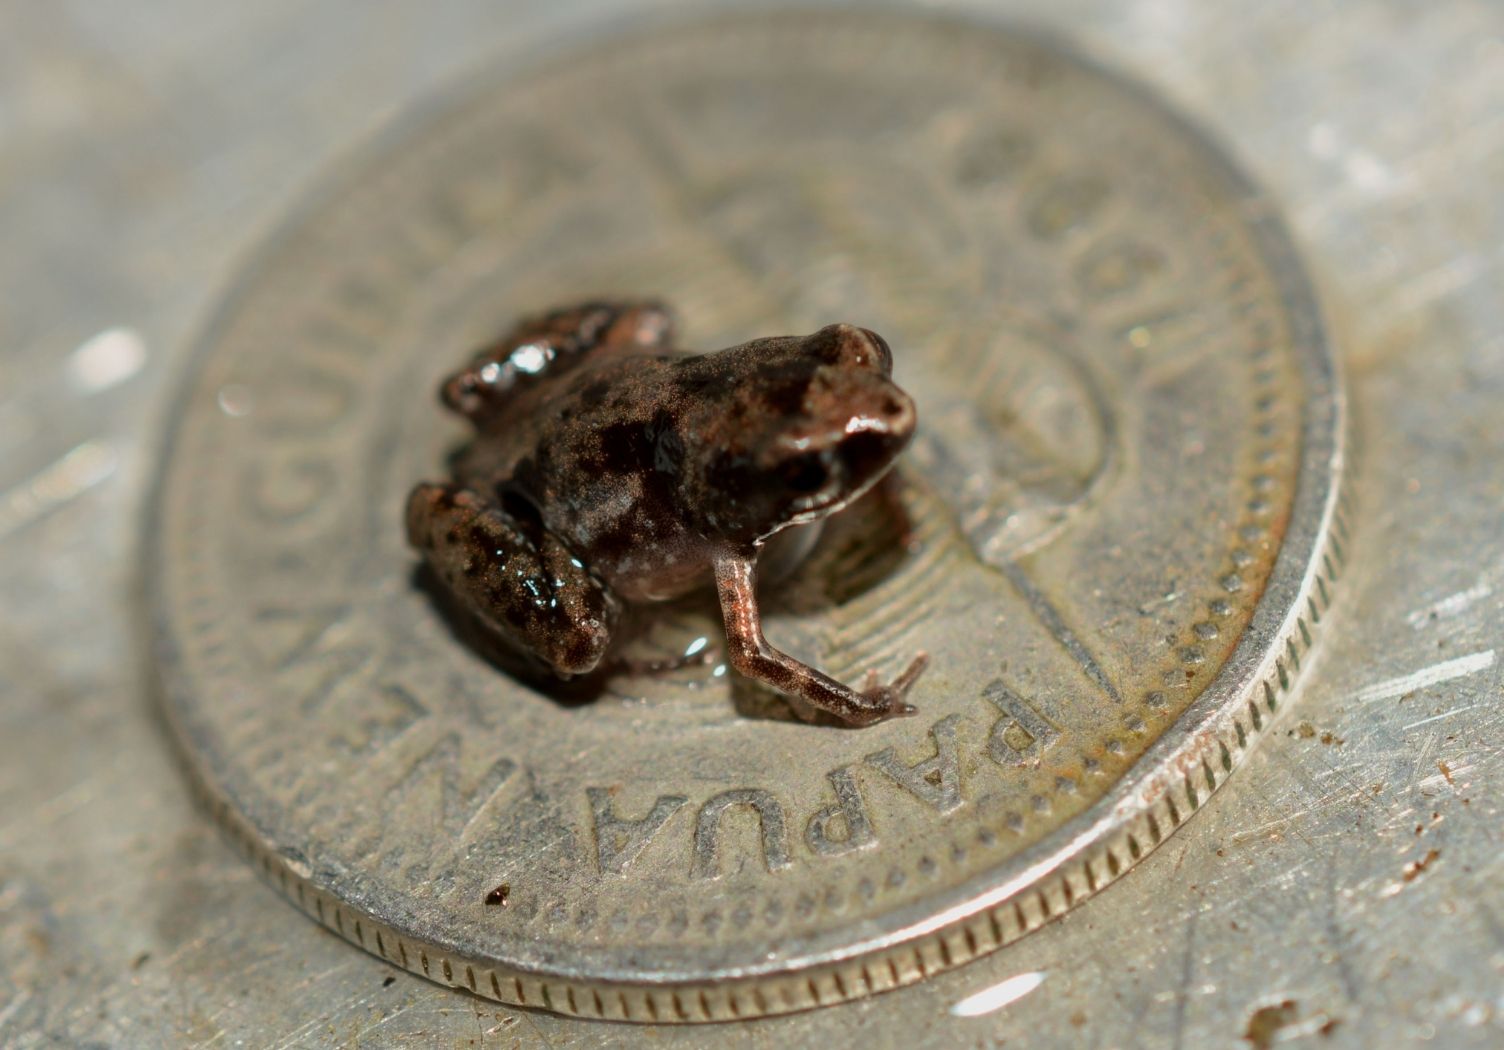 https://www.coolearth.org/wp-content/uploads/2021/11/Frog-species-Paedophryne-Amauensis-is-pictured-sitting-on-a-Papua-New-Guinea-10-toea-coin.jpg